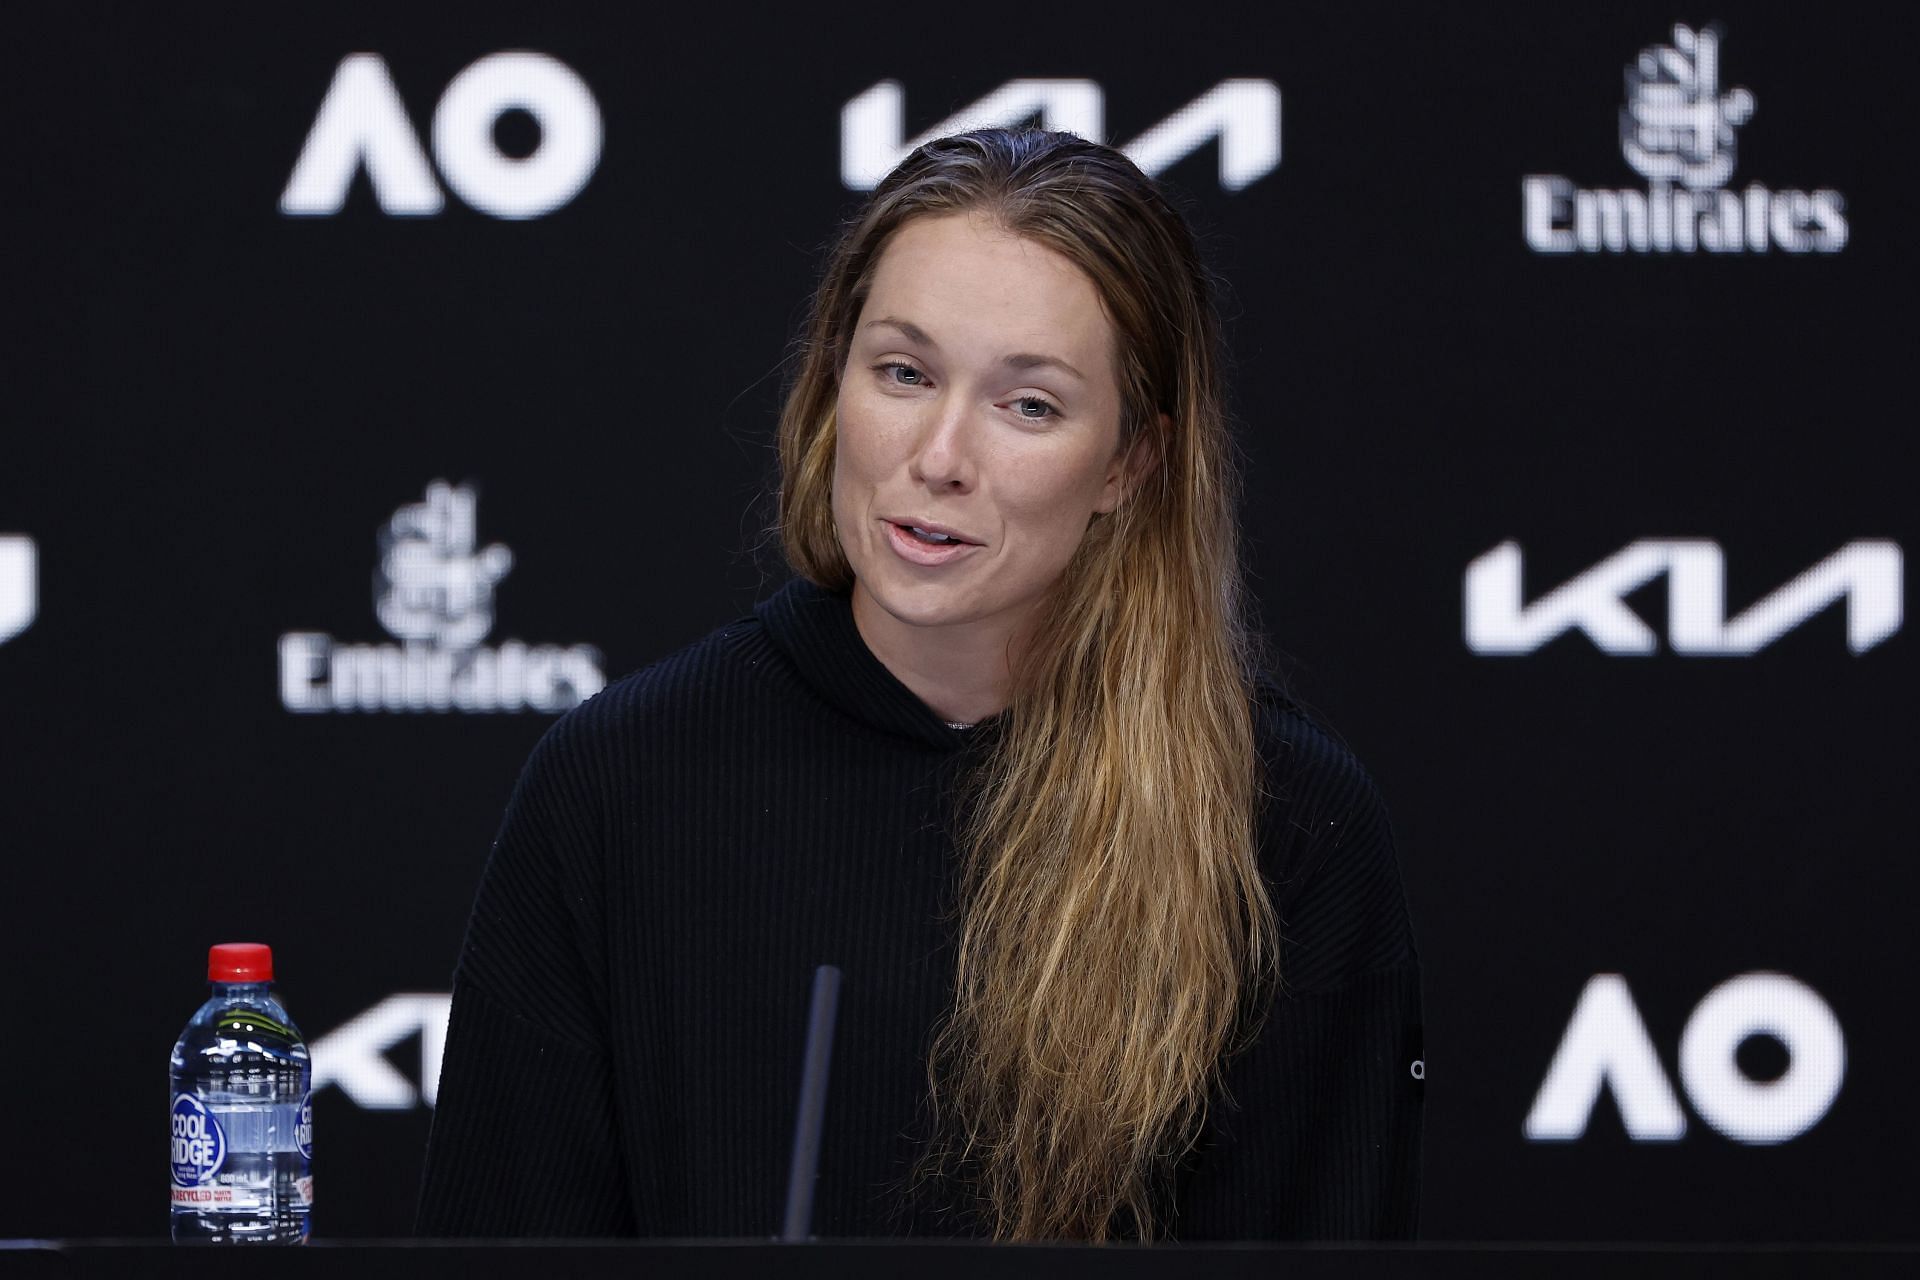 Danielle Collins played Australian Open without an official apparel or shoe sponsor